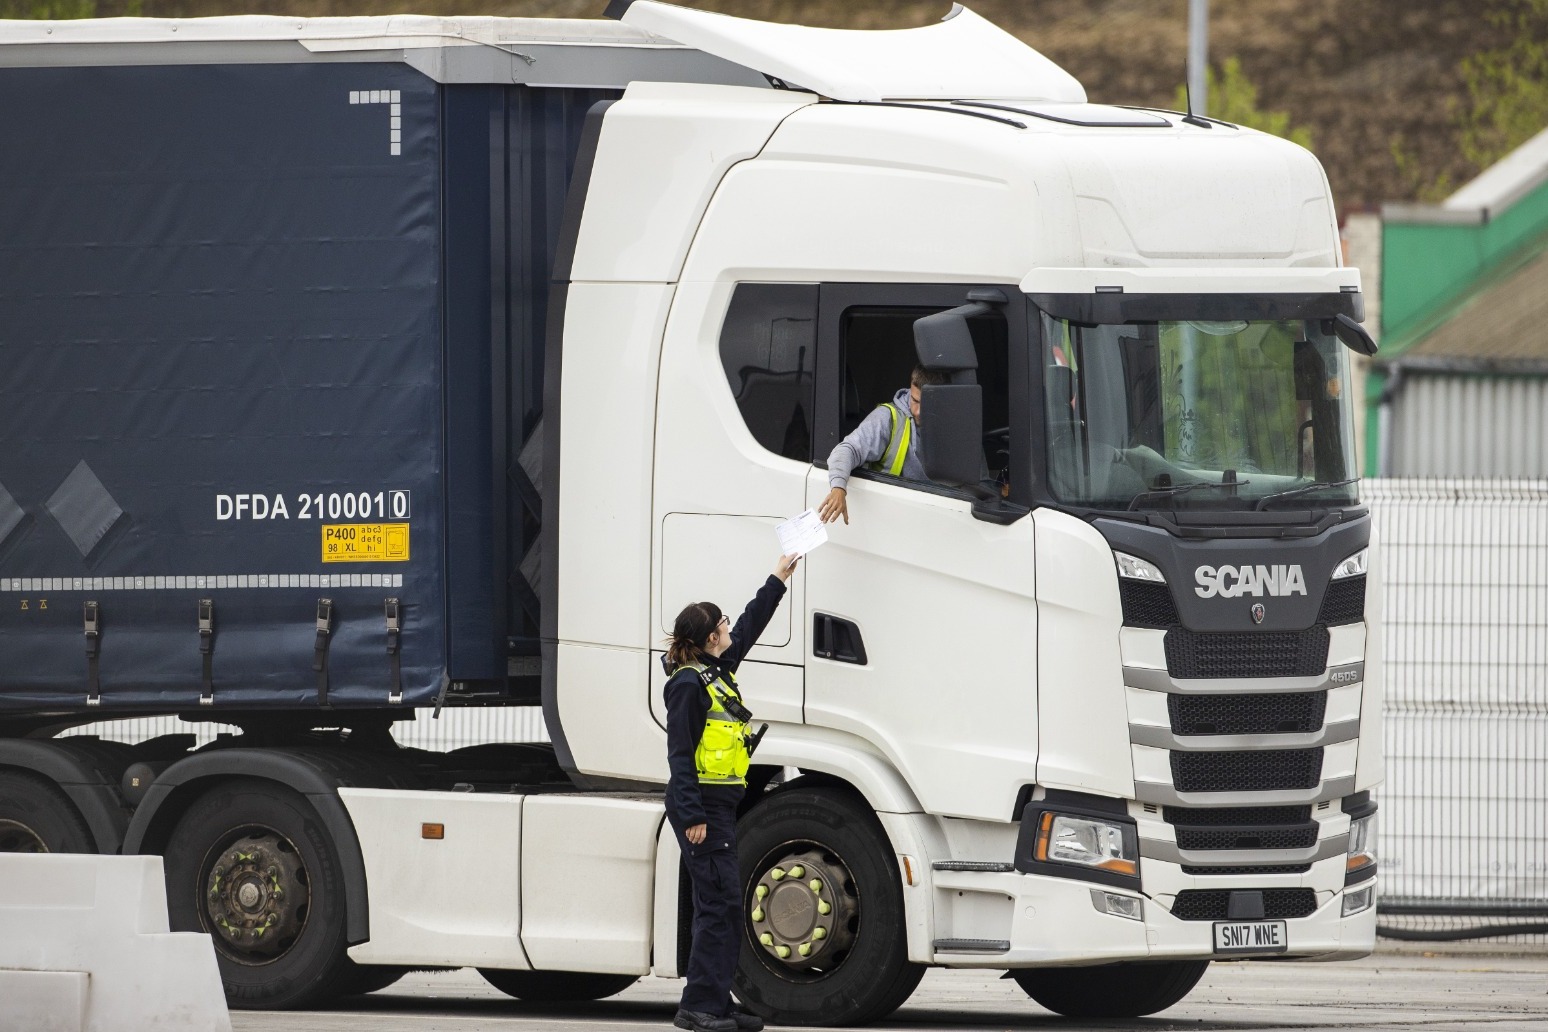 Demands for border checks on animal products from EU amid safety fears 